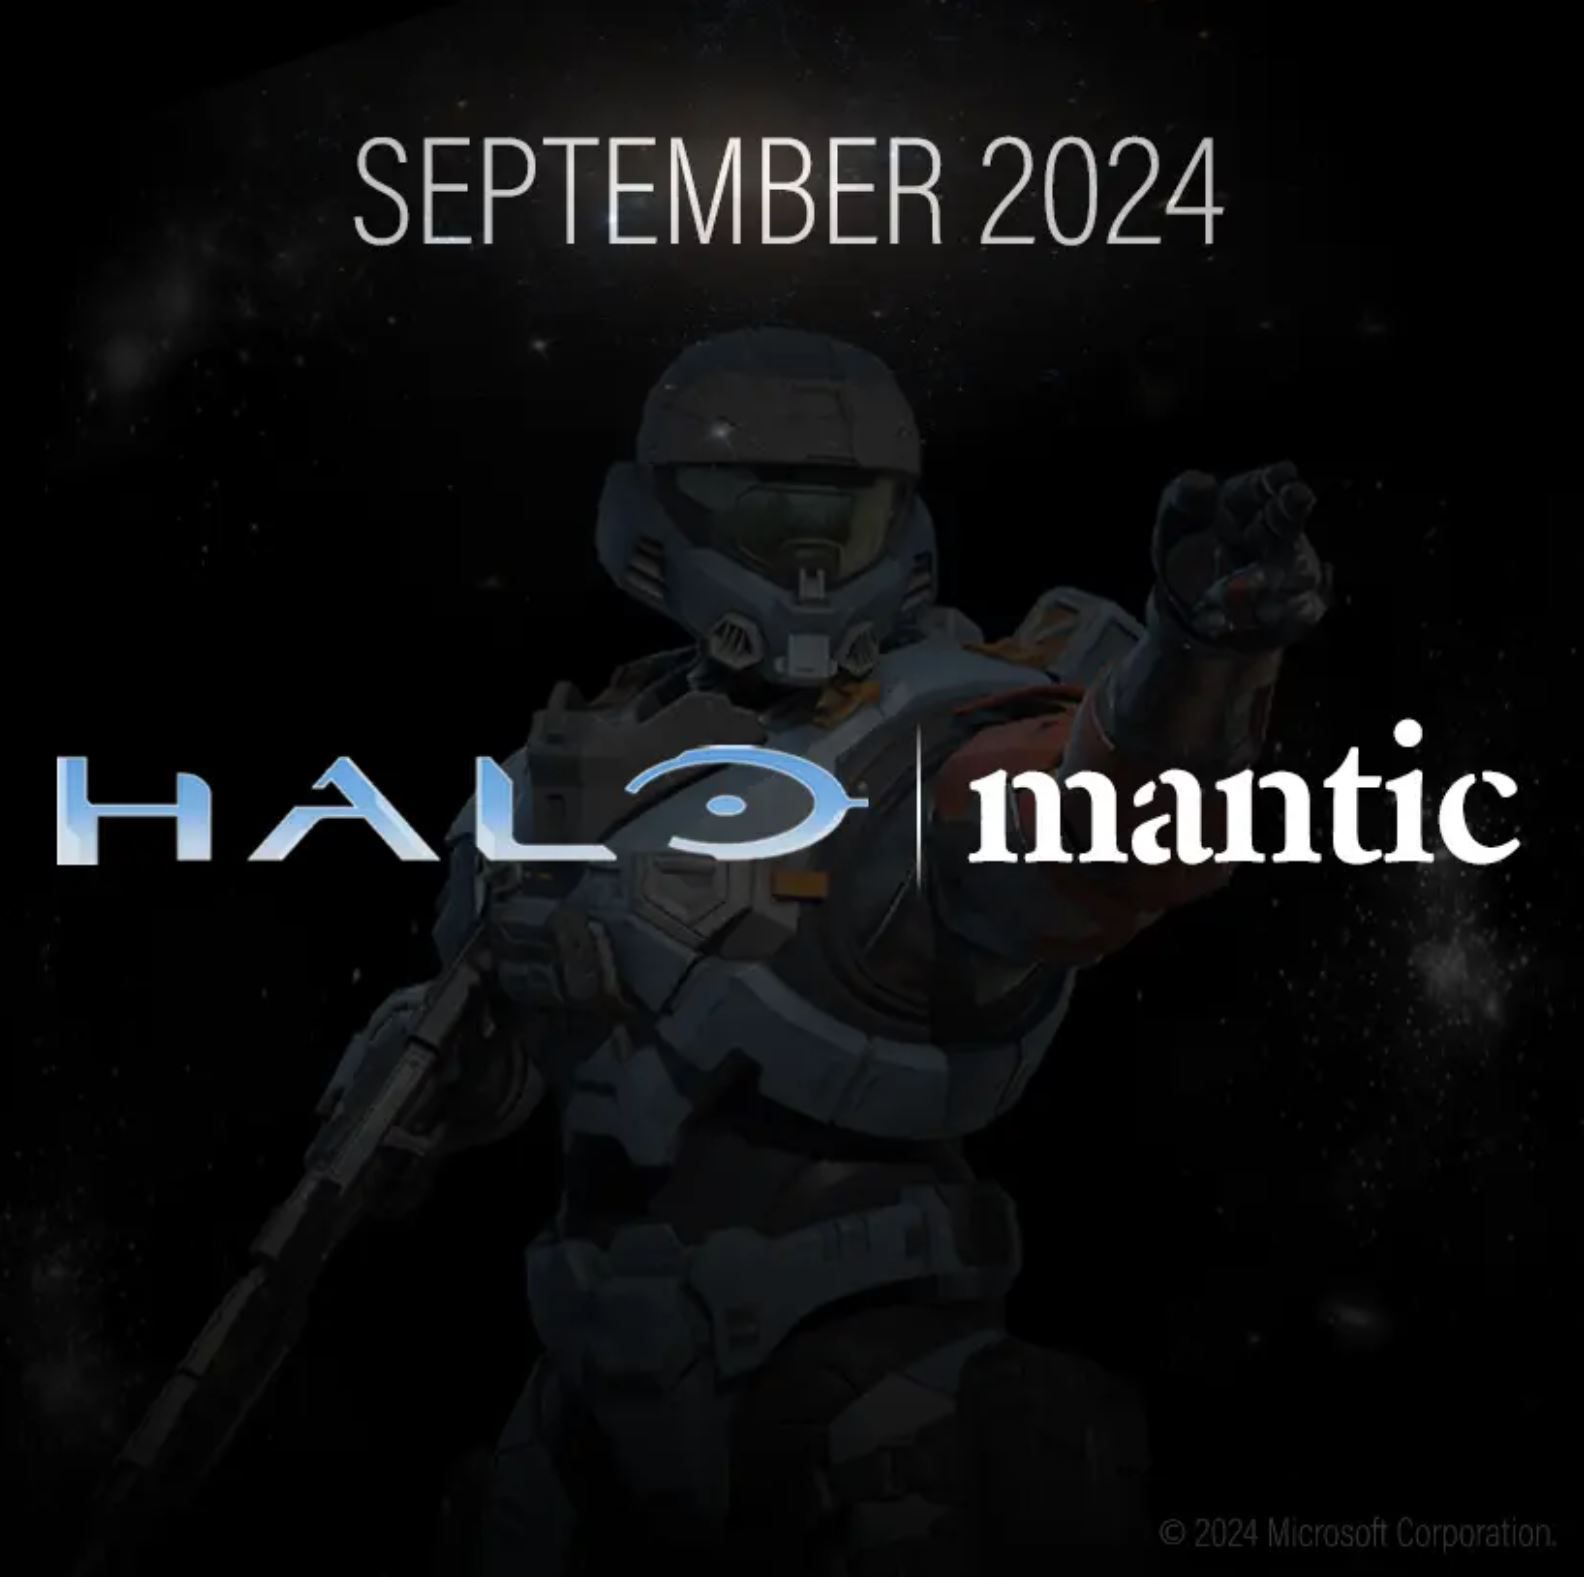 A Spartan soldier stands pointing a finger. Halo | Mantic